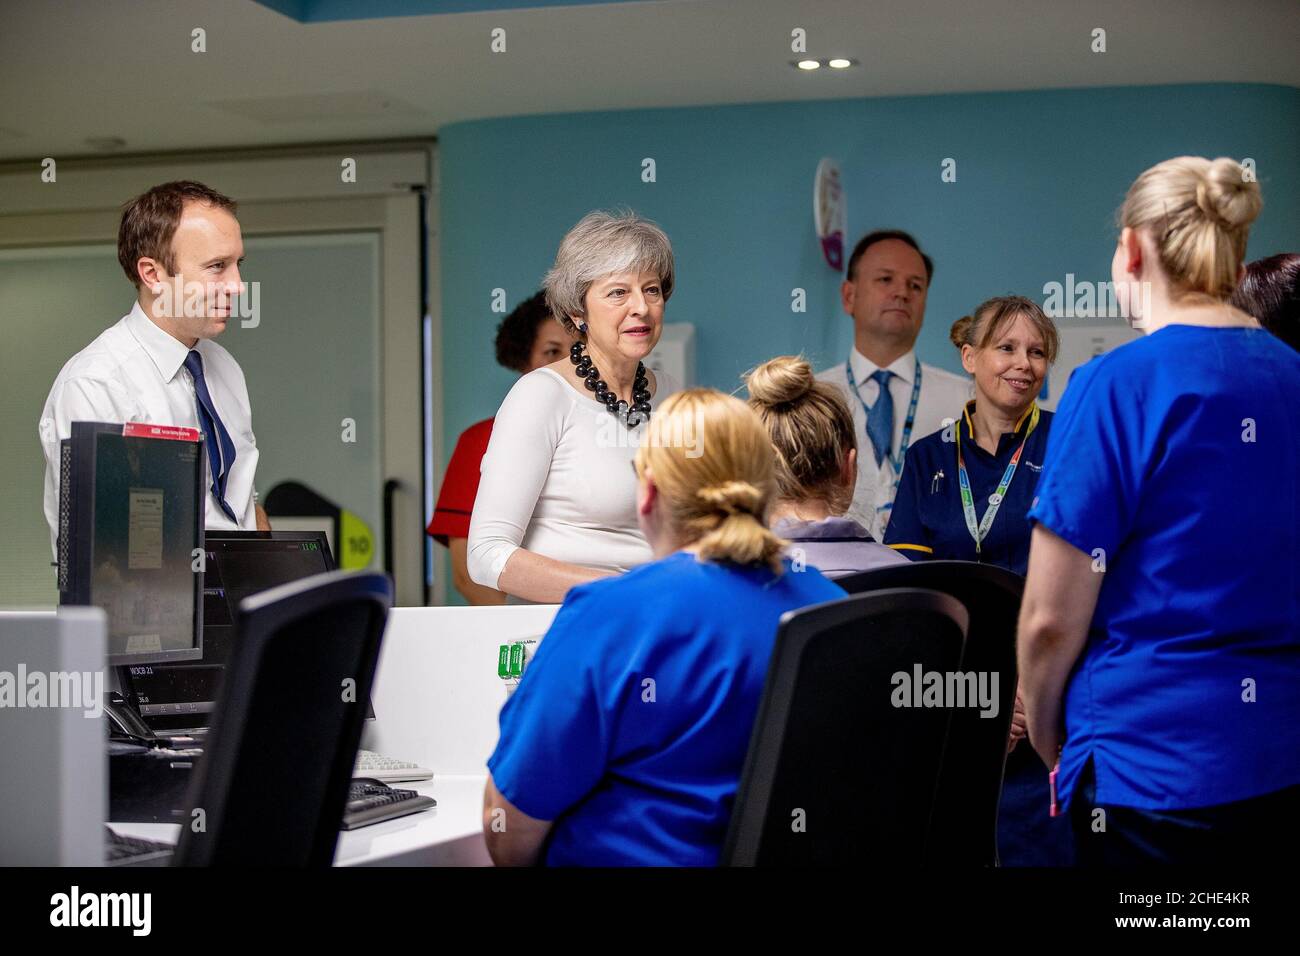 Health and Social Care Secretary Matt Hancock (left), Prime Minister Theresa May and NHS England Chief Executive Simon Stevens visiting the wards at Alder Hey Children's Hospital, Liverpool where they launched the NHS Long Term Plan. Stock Photo